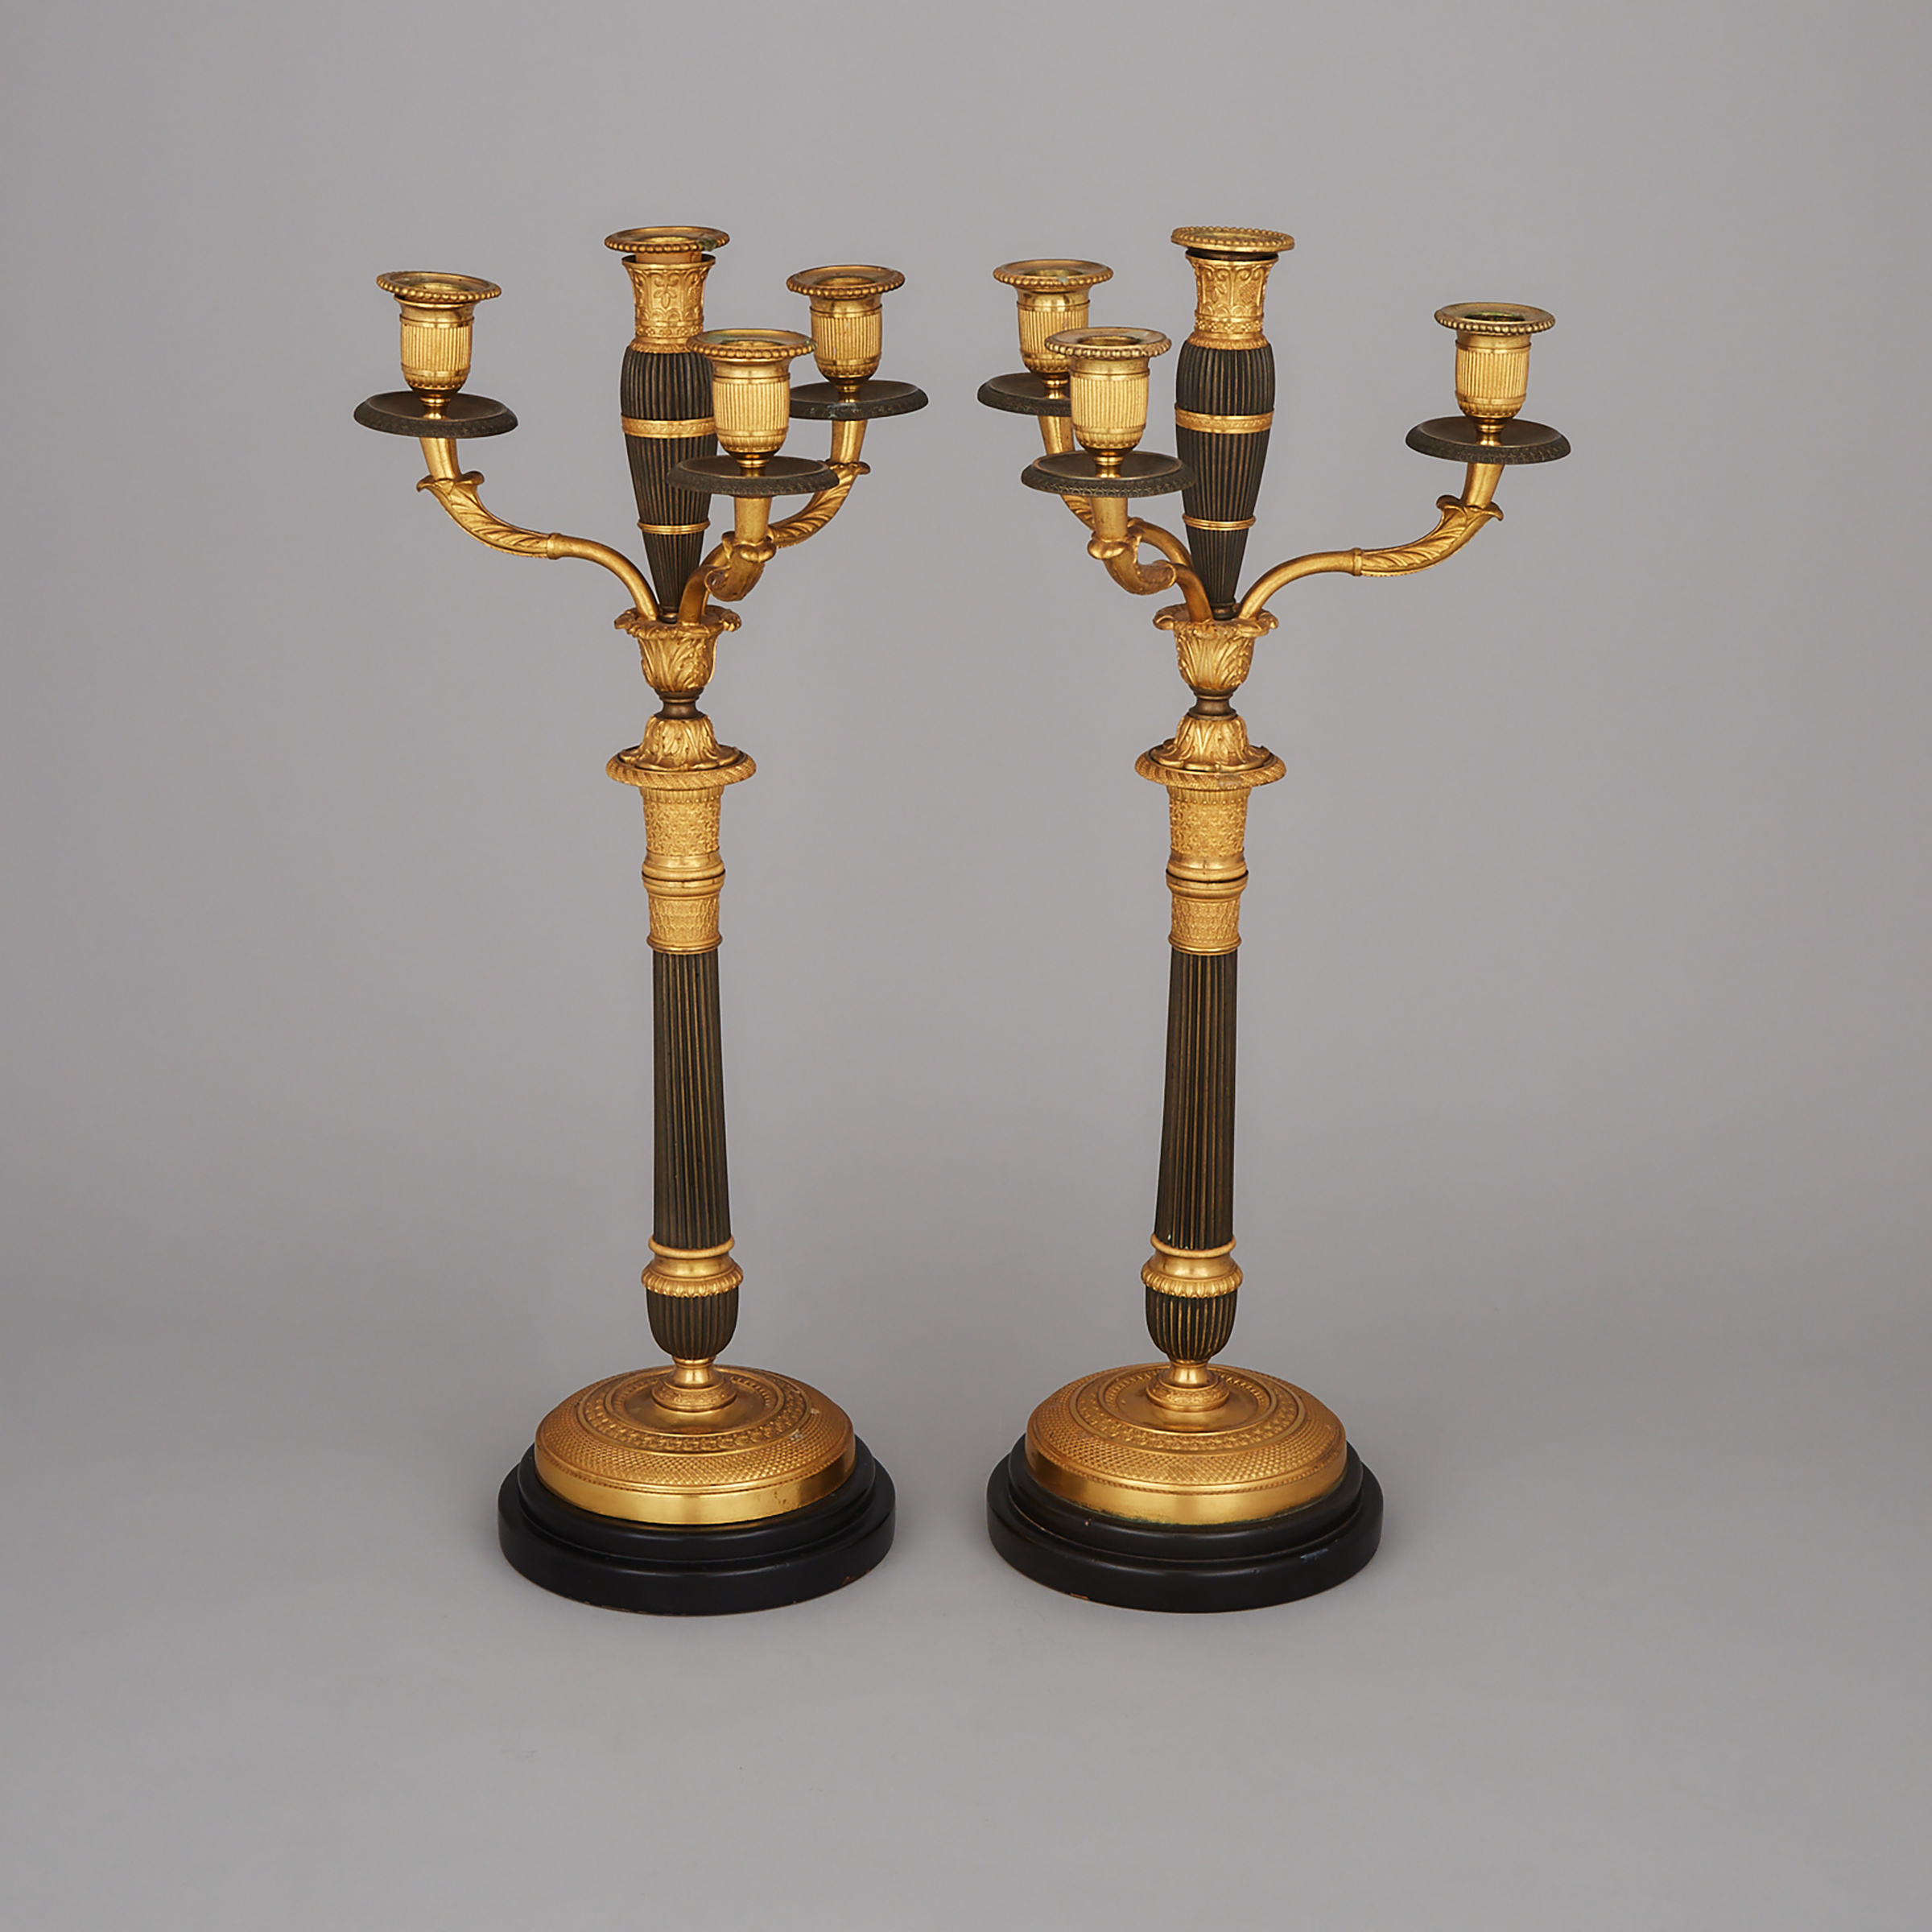 Pair of French Empire Gilt and Patinated Bronze Candelabra, 19th century